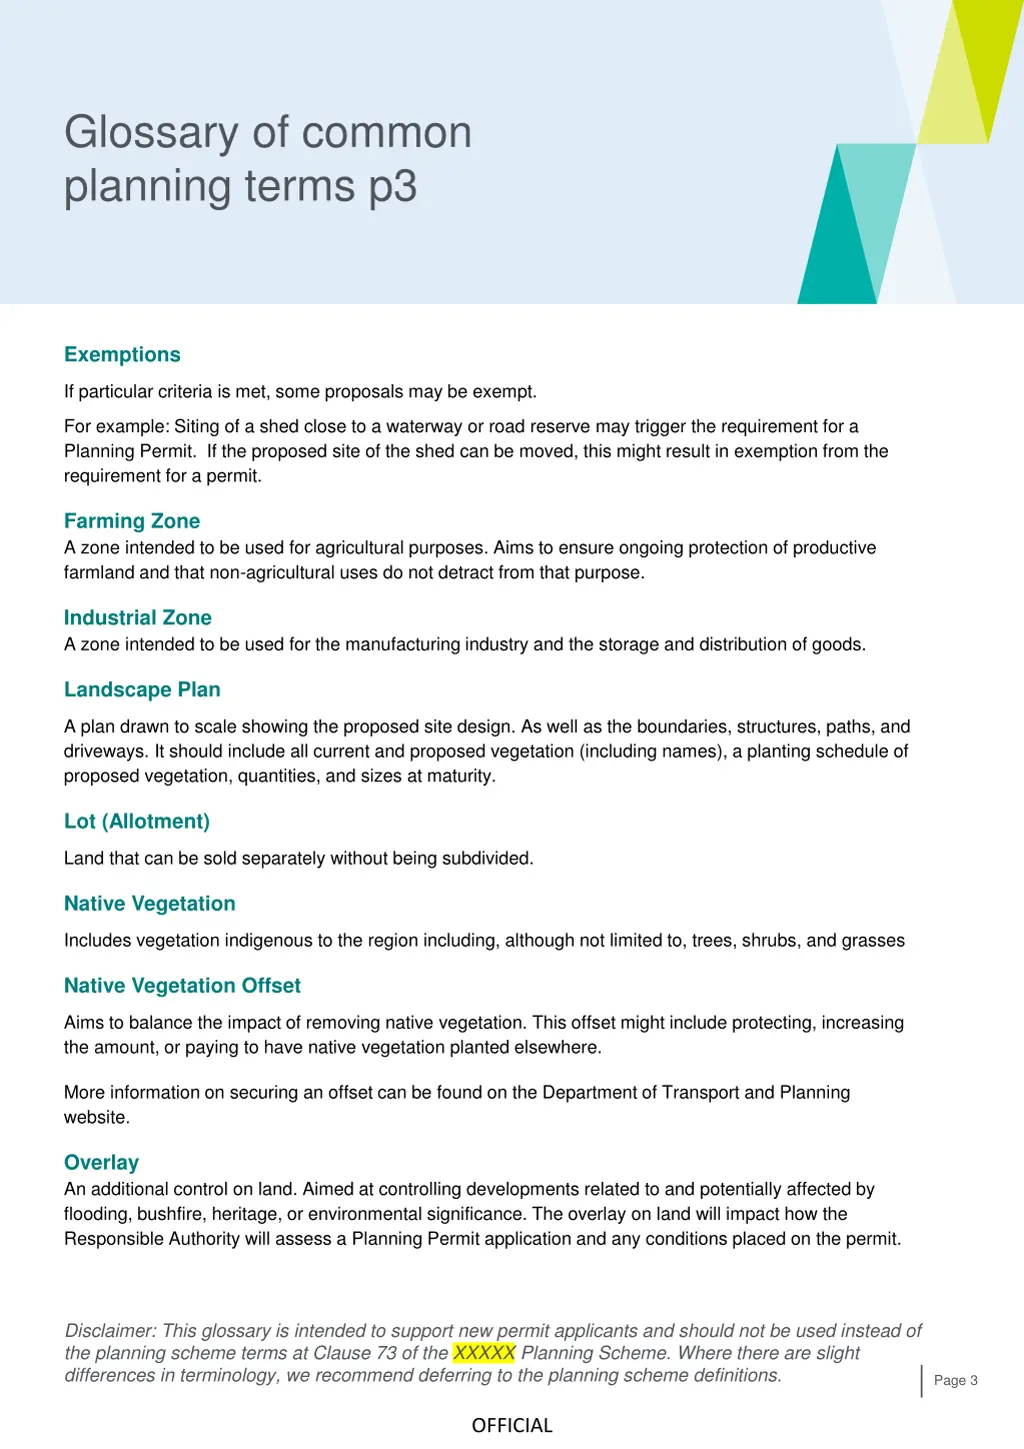 glossary of common planning terms p3